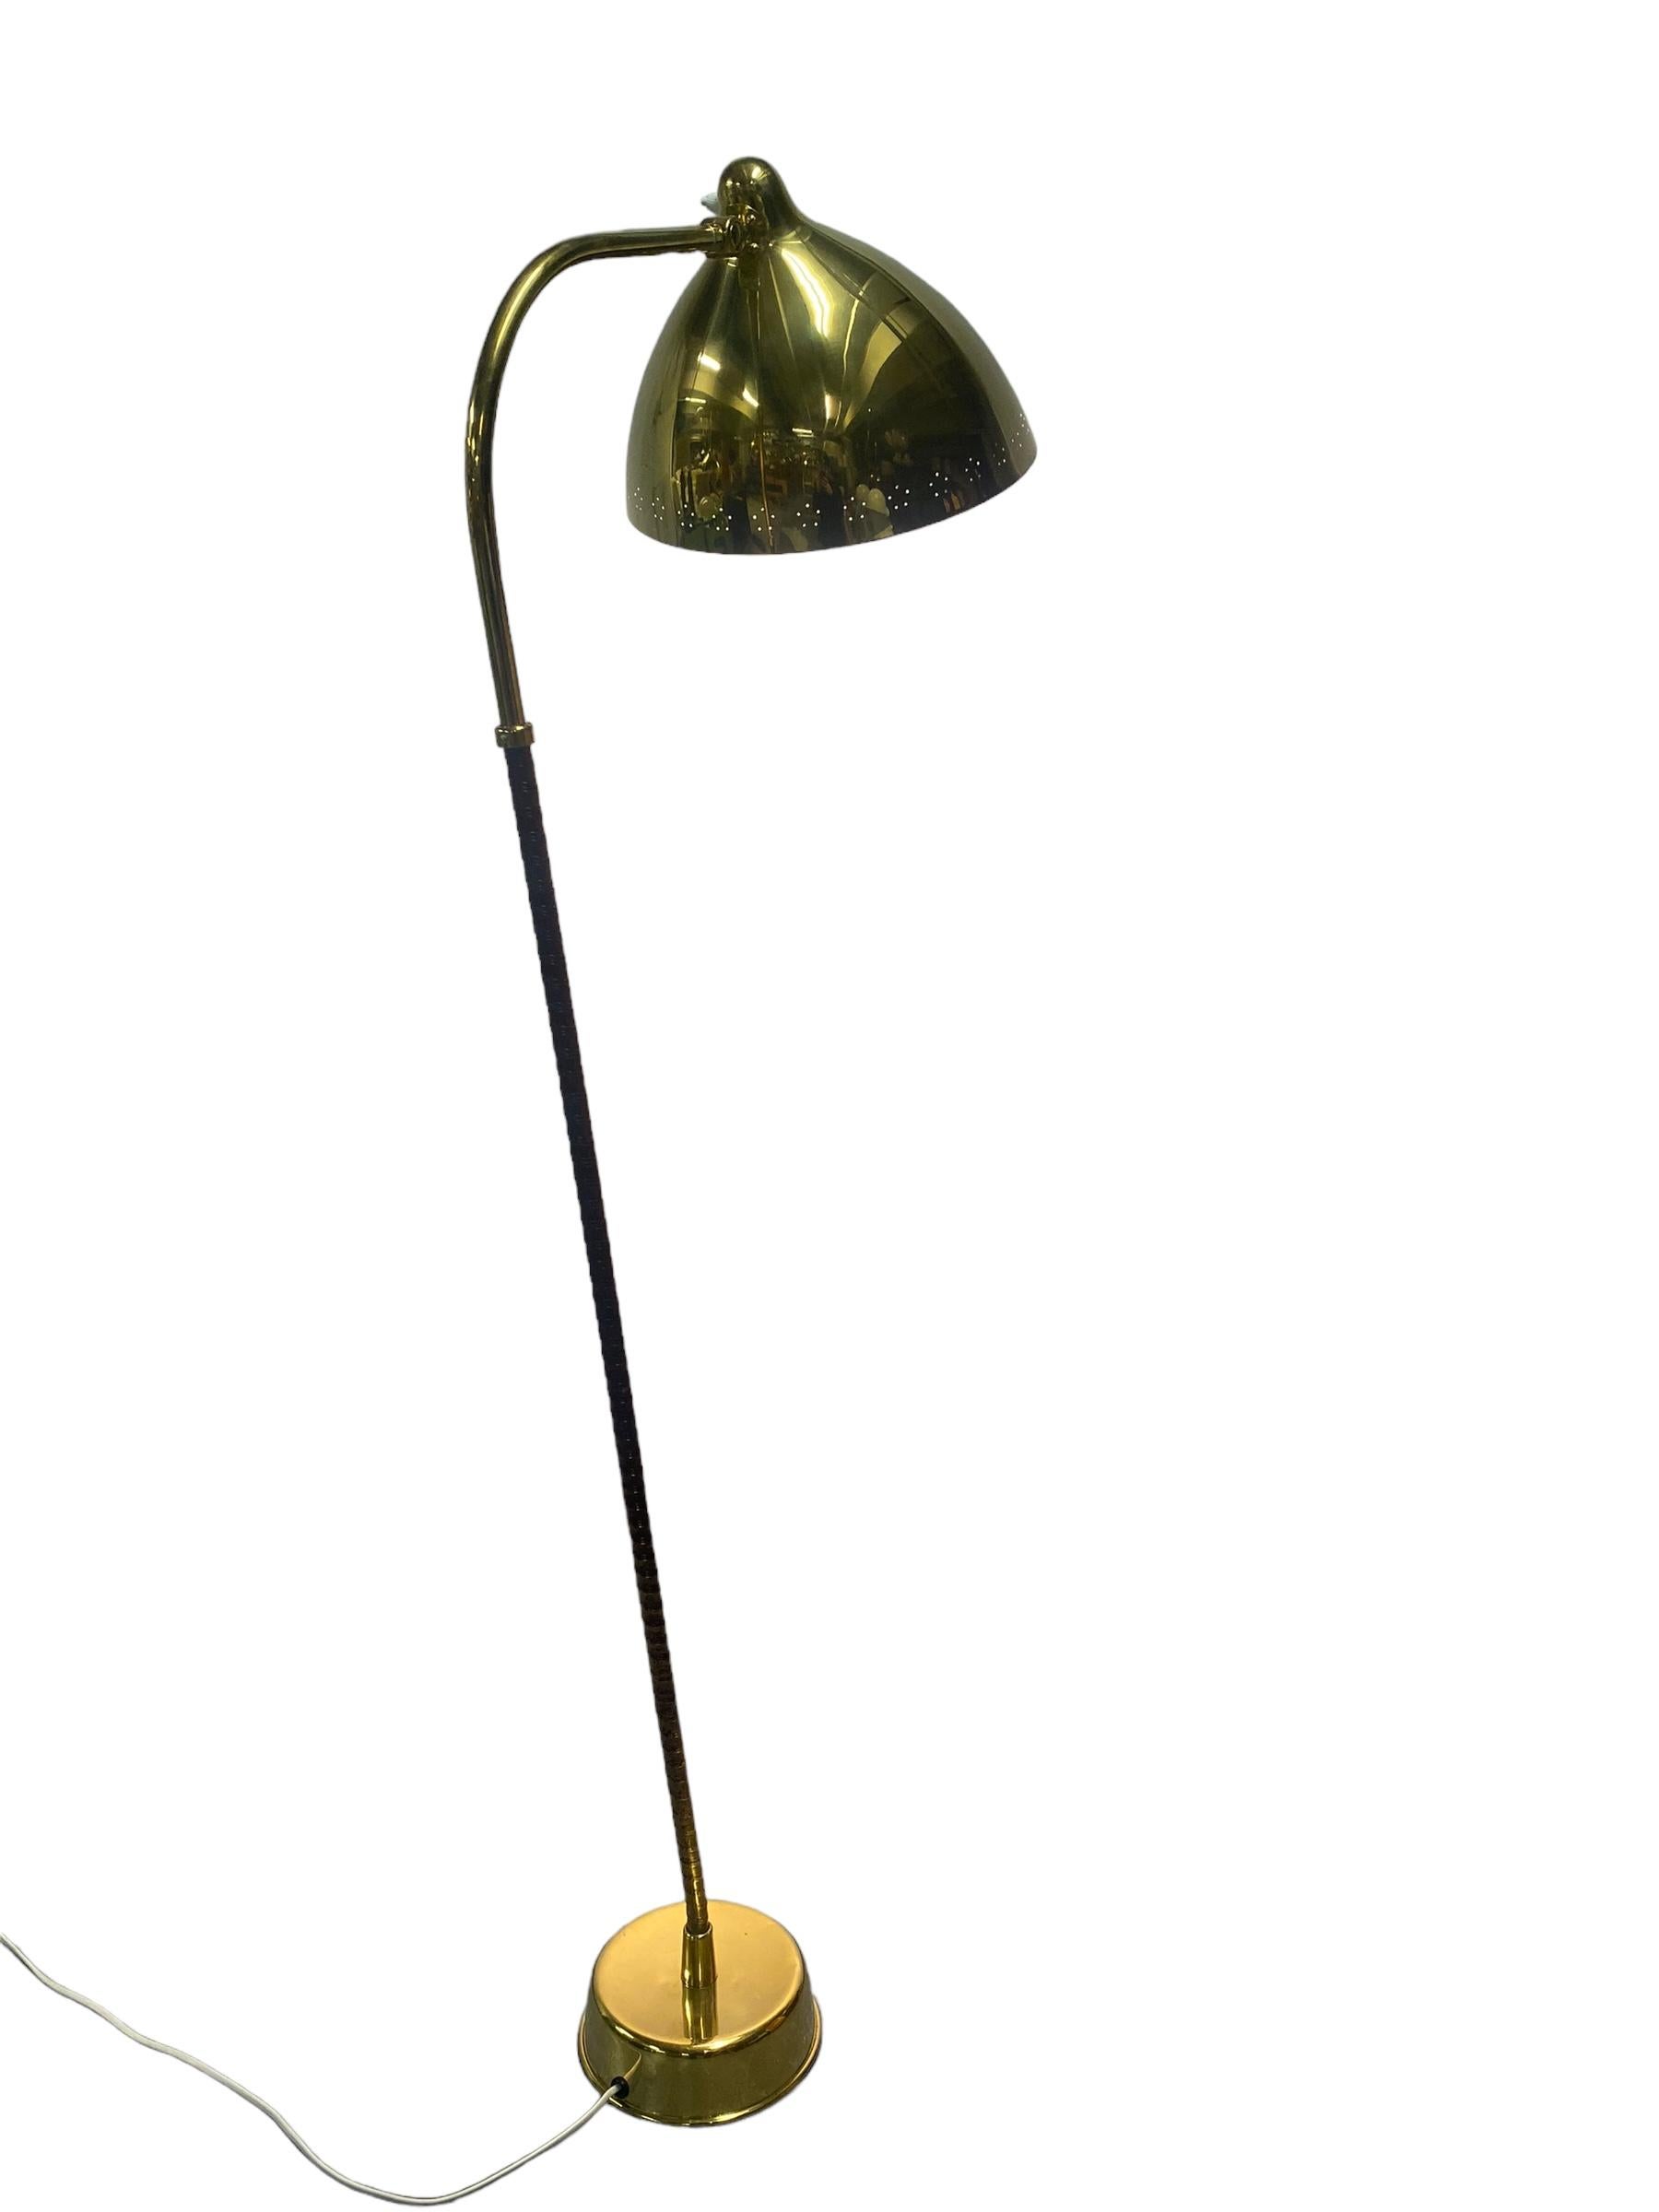 A Beautiful and original floor lamp from the 1950s, with a full brass shade. Designed by Lisa-Johansson pape and manufactured by Orno. In complete original condition with a beautiful patina on the stem and brass parts. The lamp features a